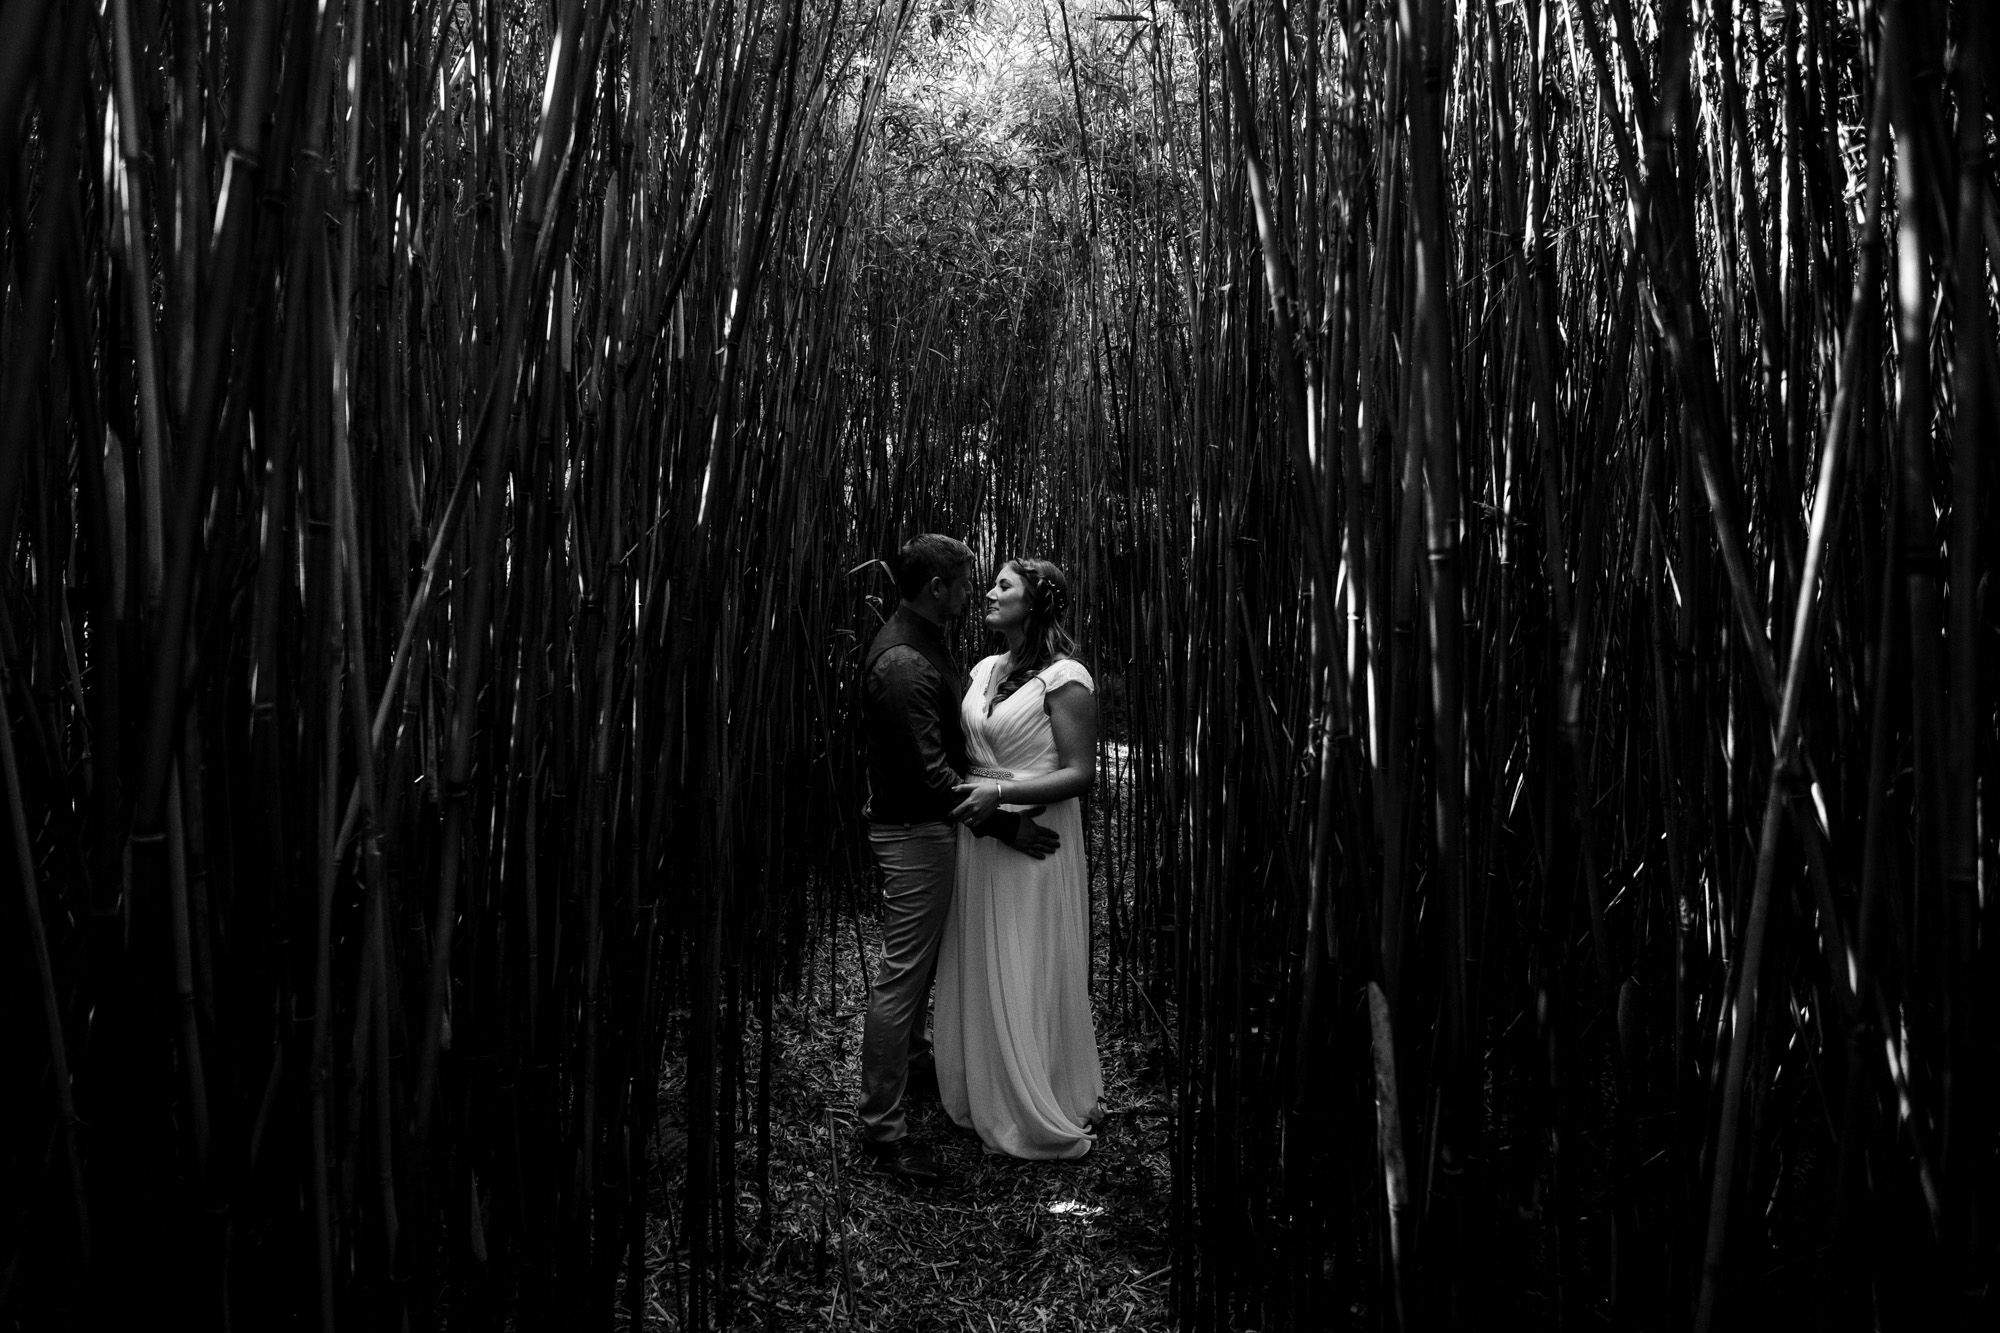 inish-beg-wedding-bamboo-forest-bride-and-groom